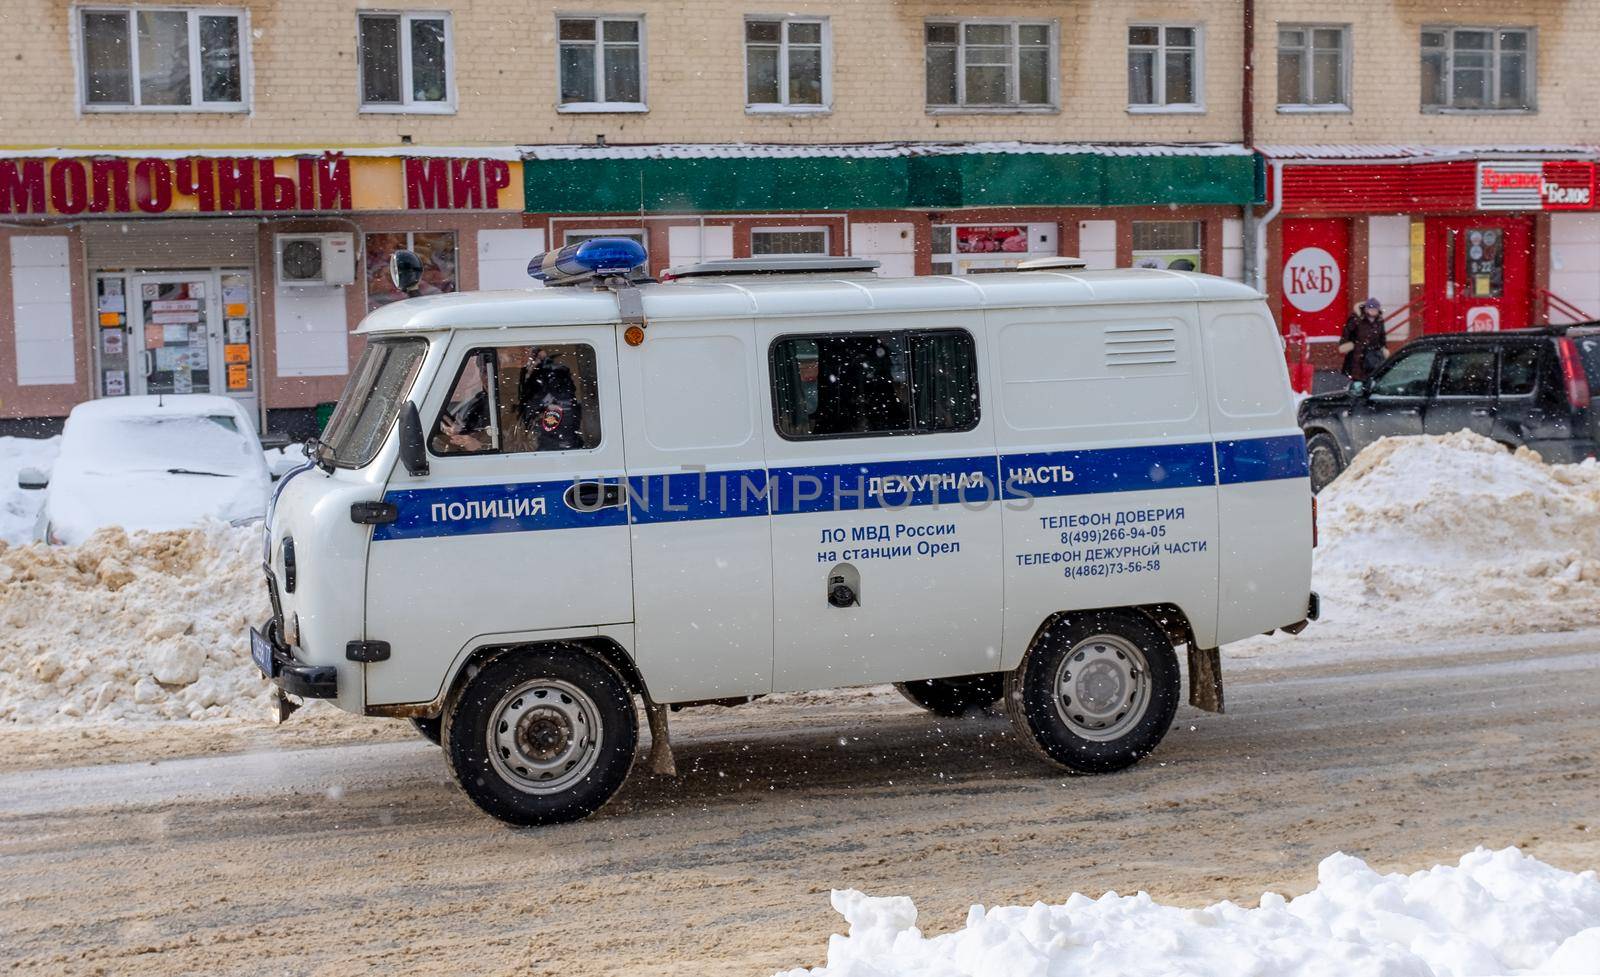 February 16, 2021, Orel, Russia. A UAZ 2206 police car on a street in Oryol during a snowfall.